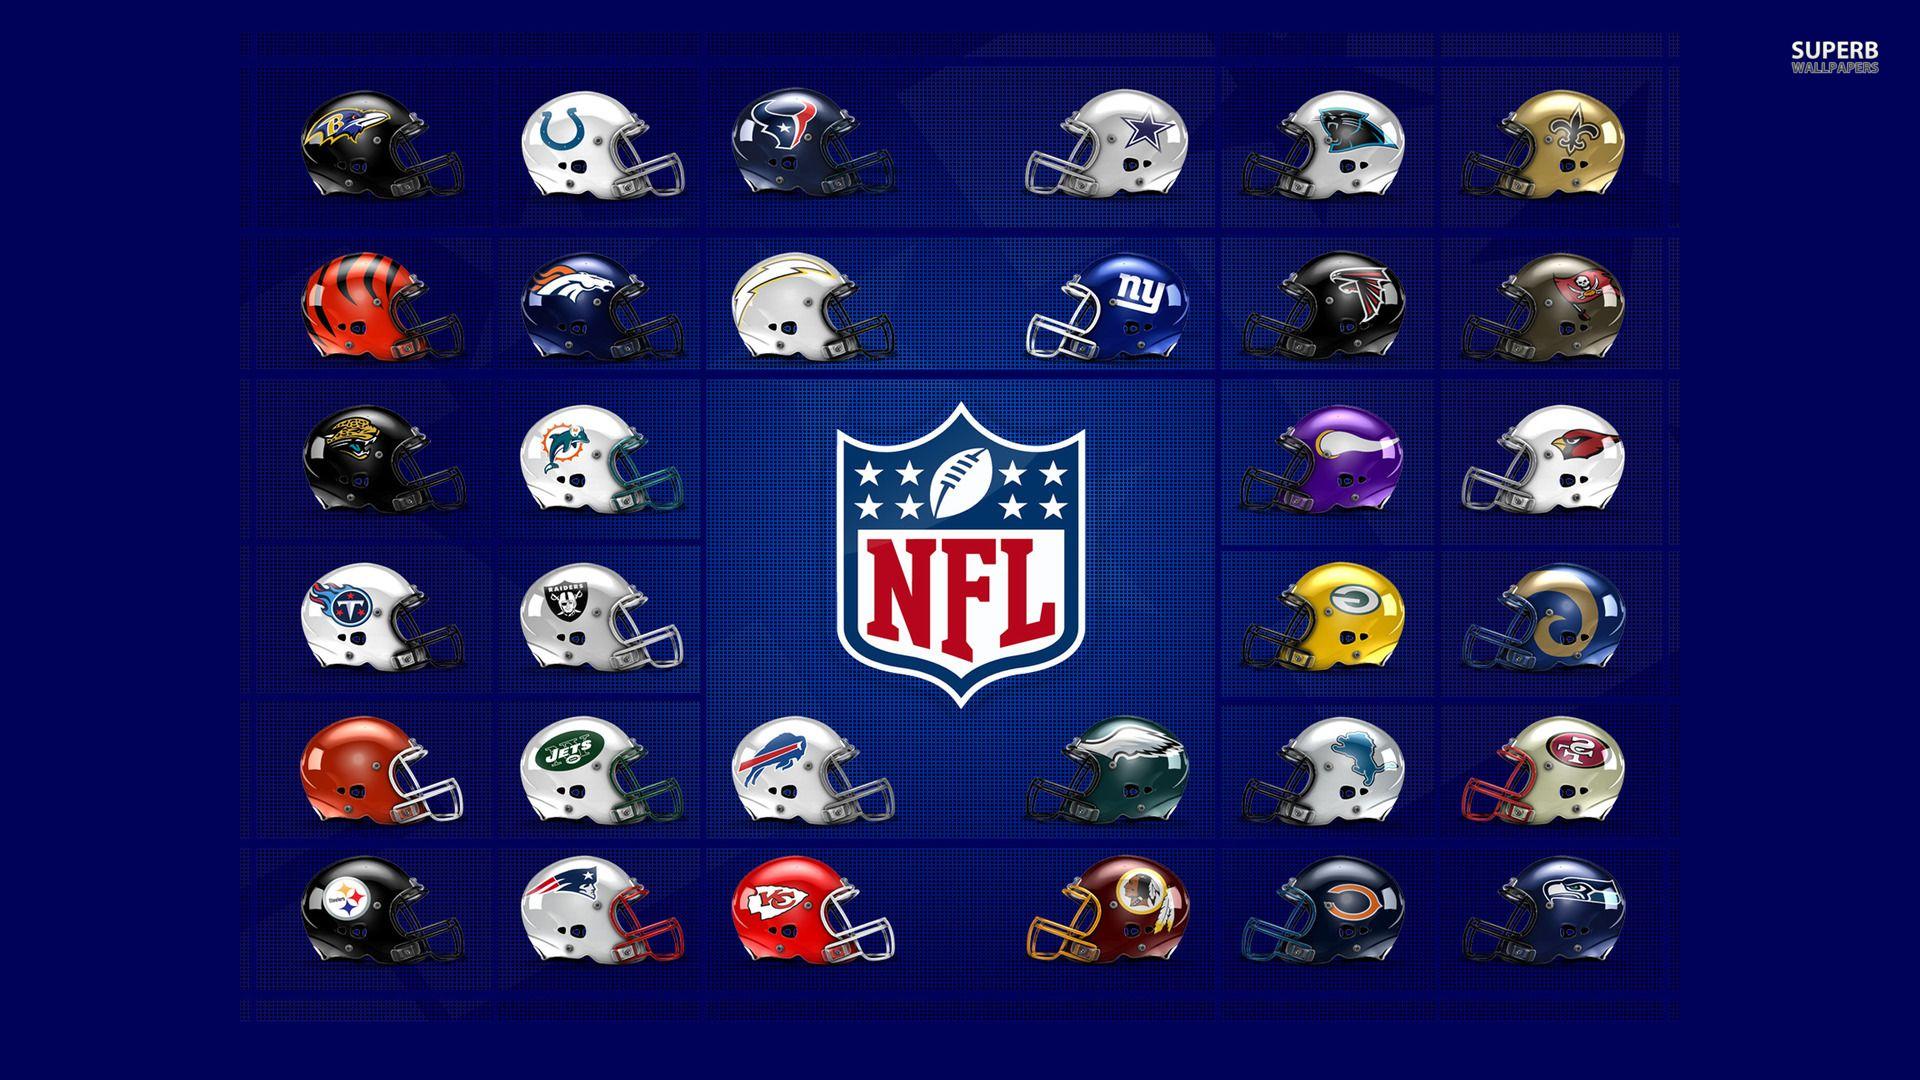 Nfl Logo Wallpapers Top Free Nfl Logo Backgrounds Wallpaperaccess